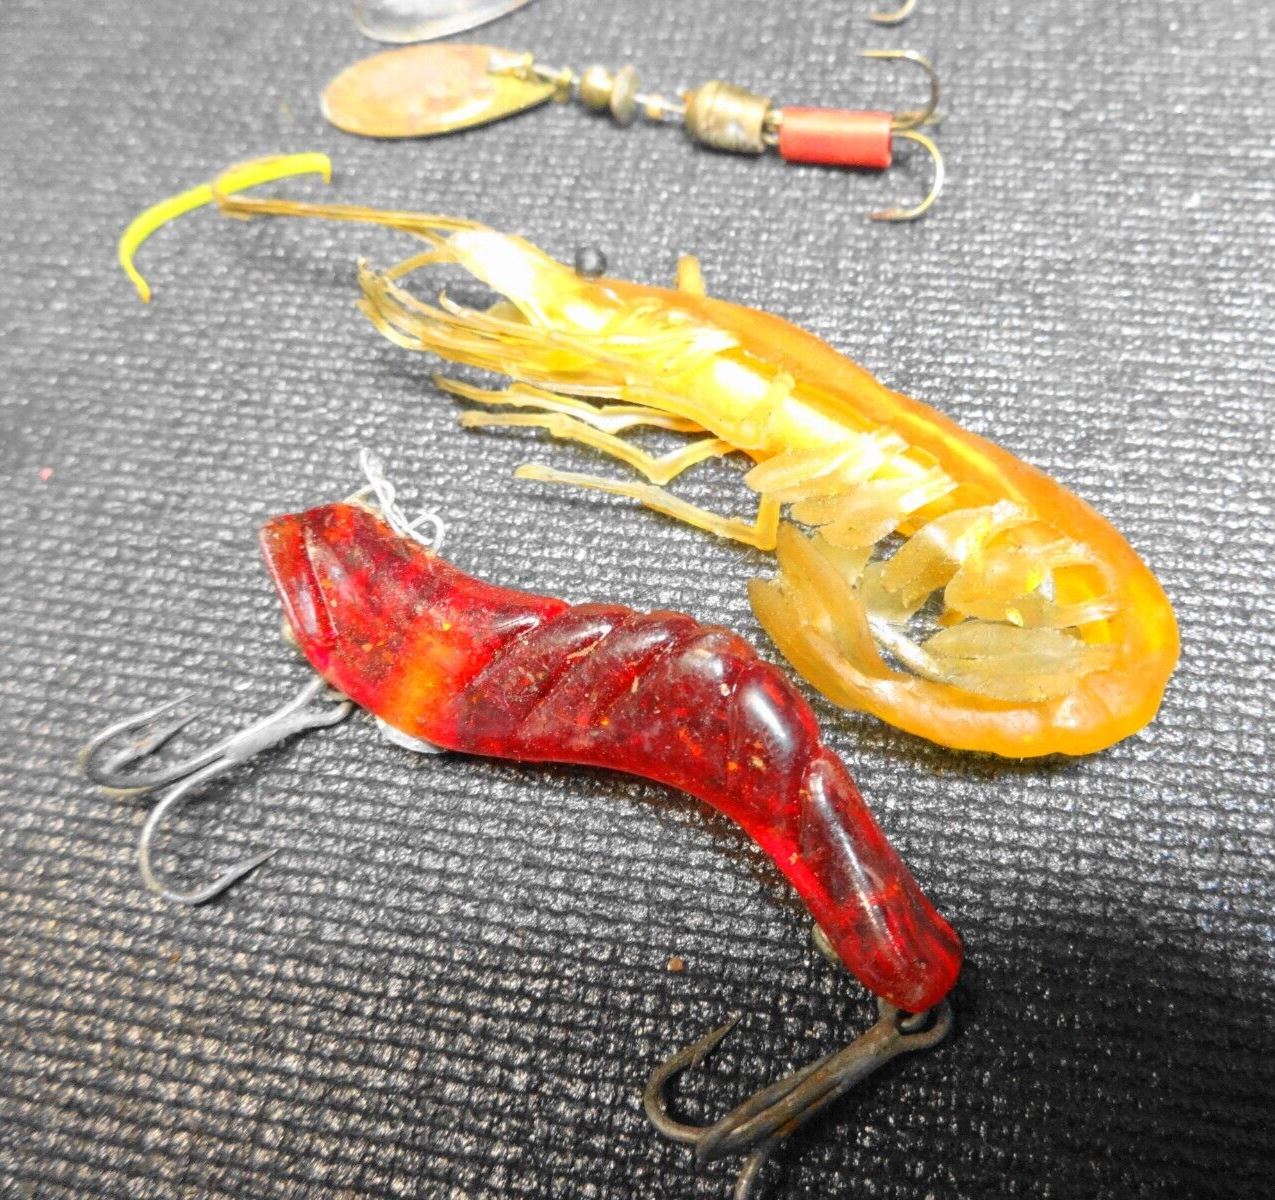 OLD Vintage FISHING TACKLE BOX LOT HOOKS LURES CRAWFISH SPOONS SPINNERS NOS